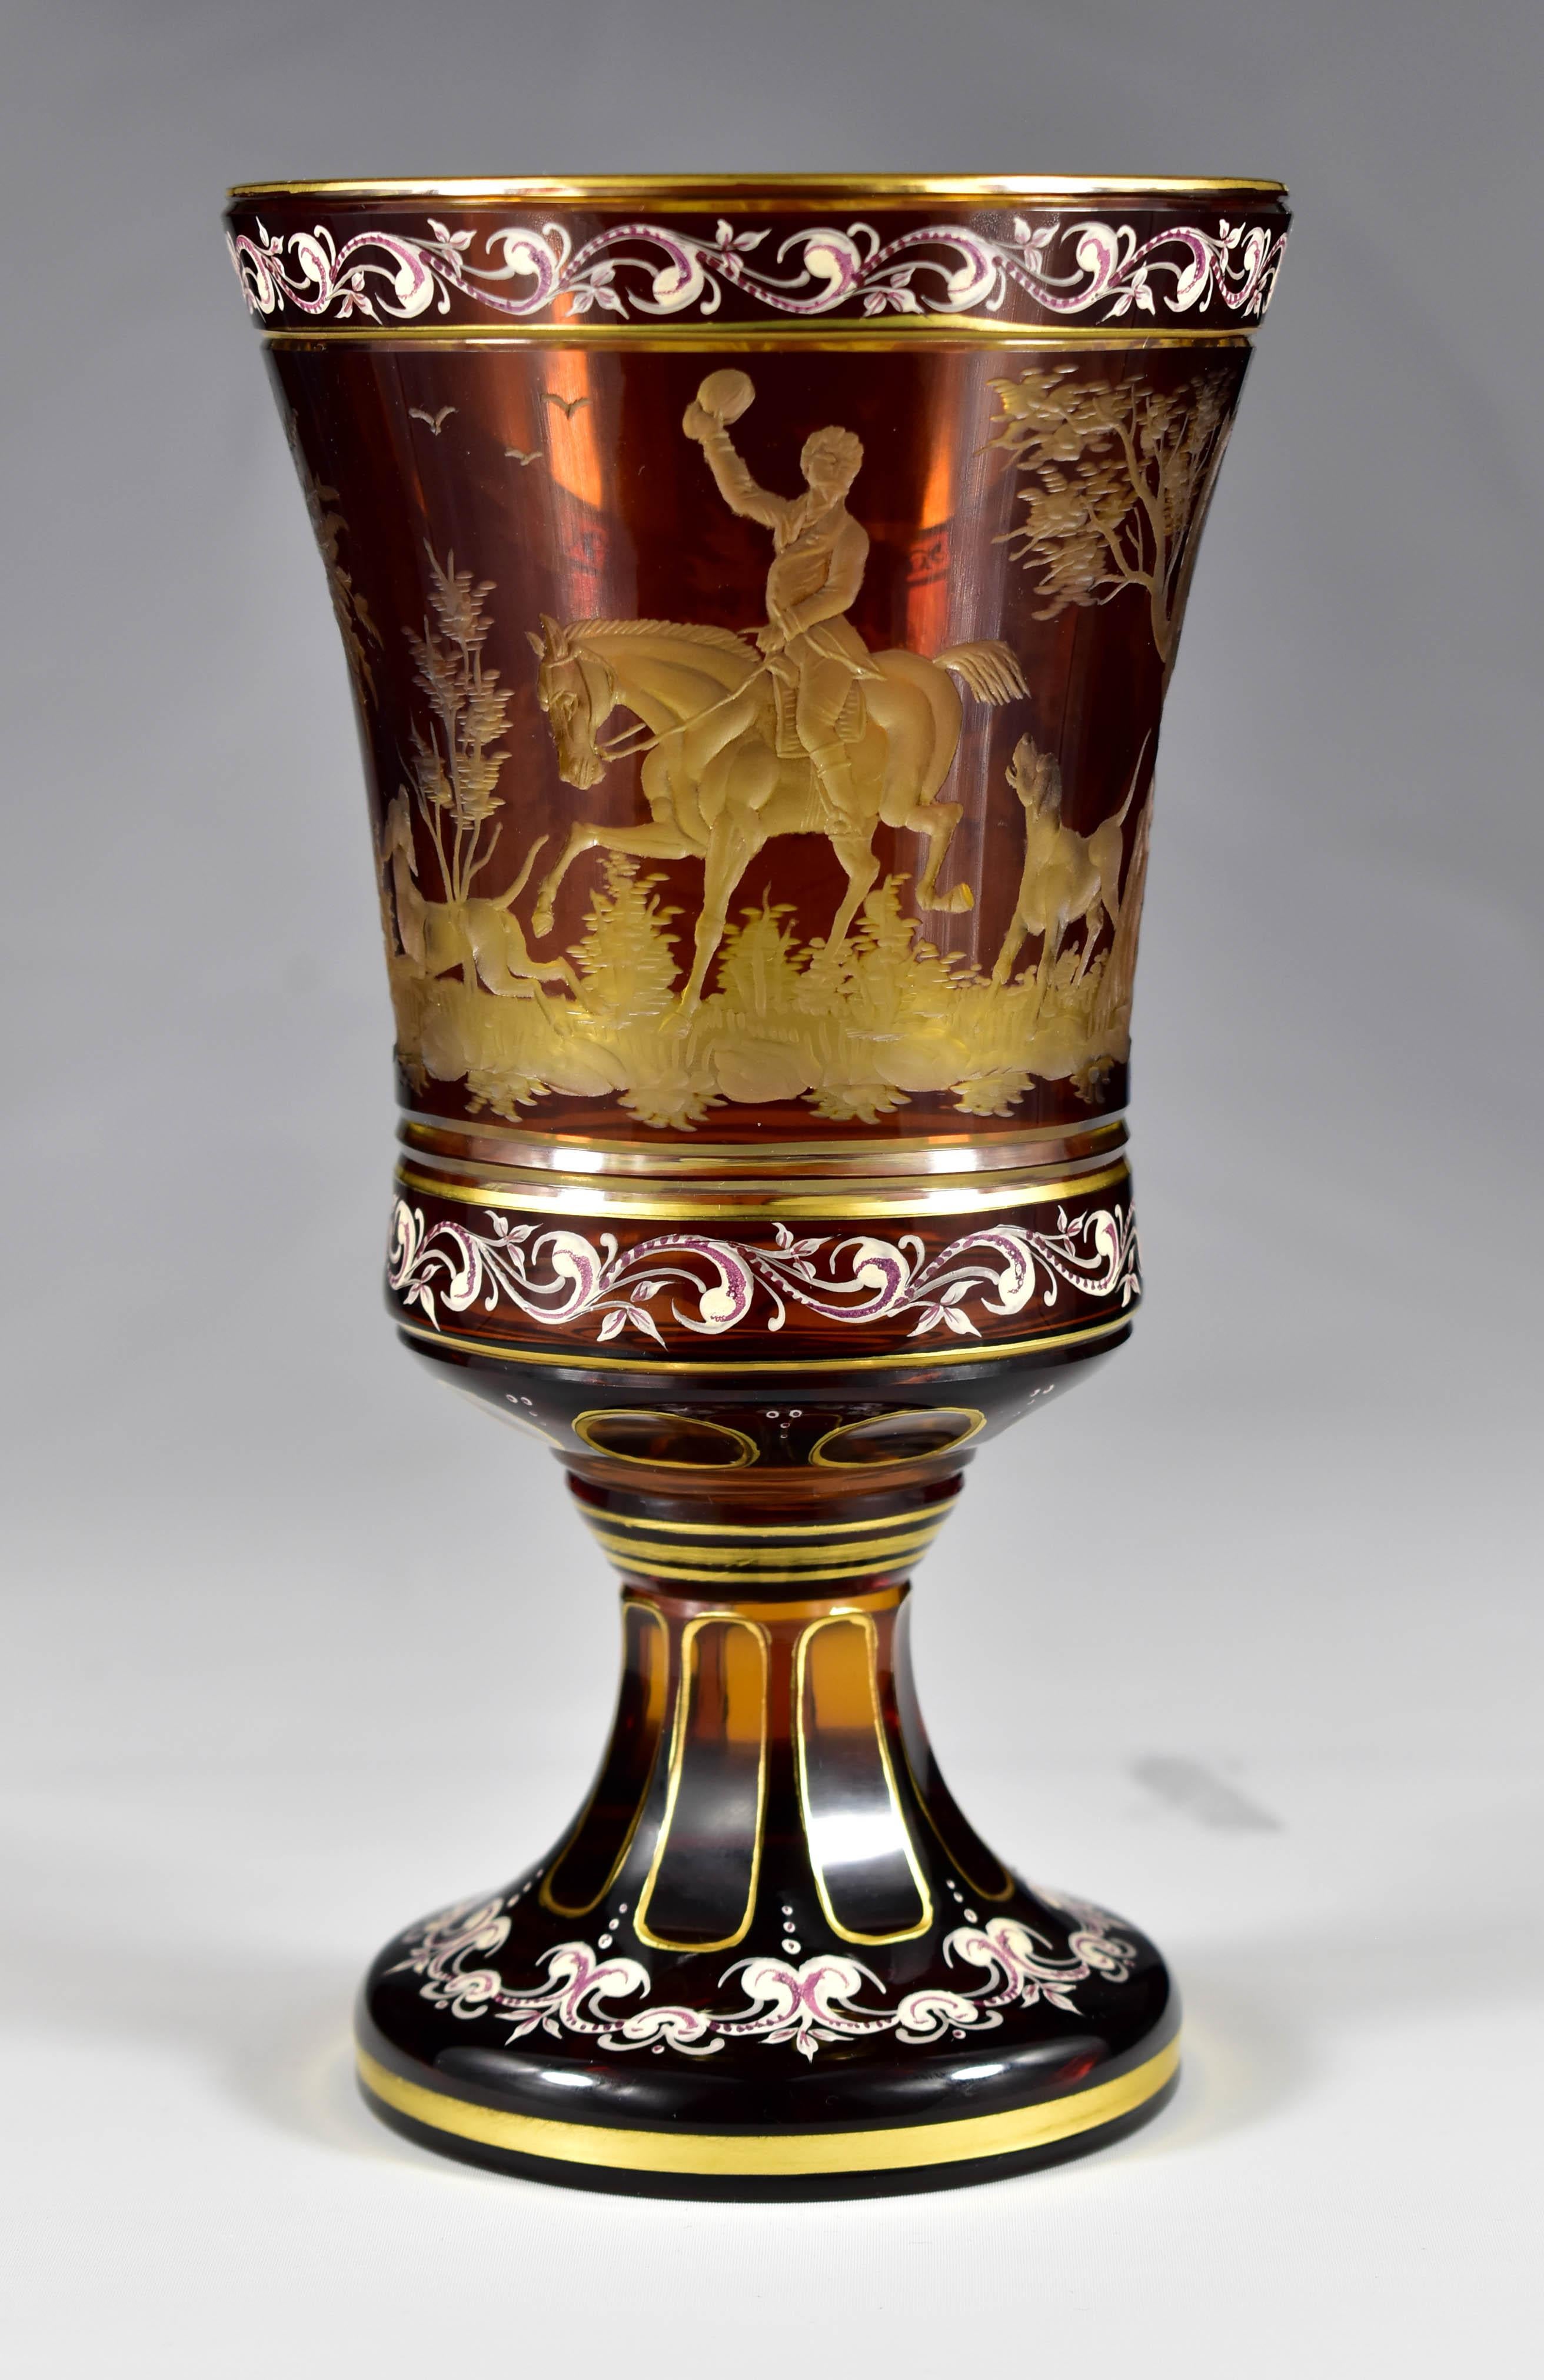 A beautiful goblet made of amber glass overlay with a yellow glaze, decorated with a painting and an engraving of a hunting motif. In the foreground is a rider on horseback with a dog, and in the background are dogs hunting ducks. Everything is